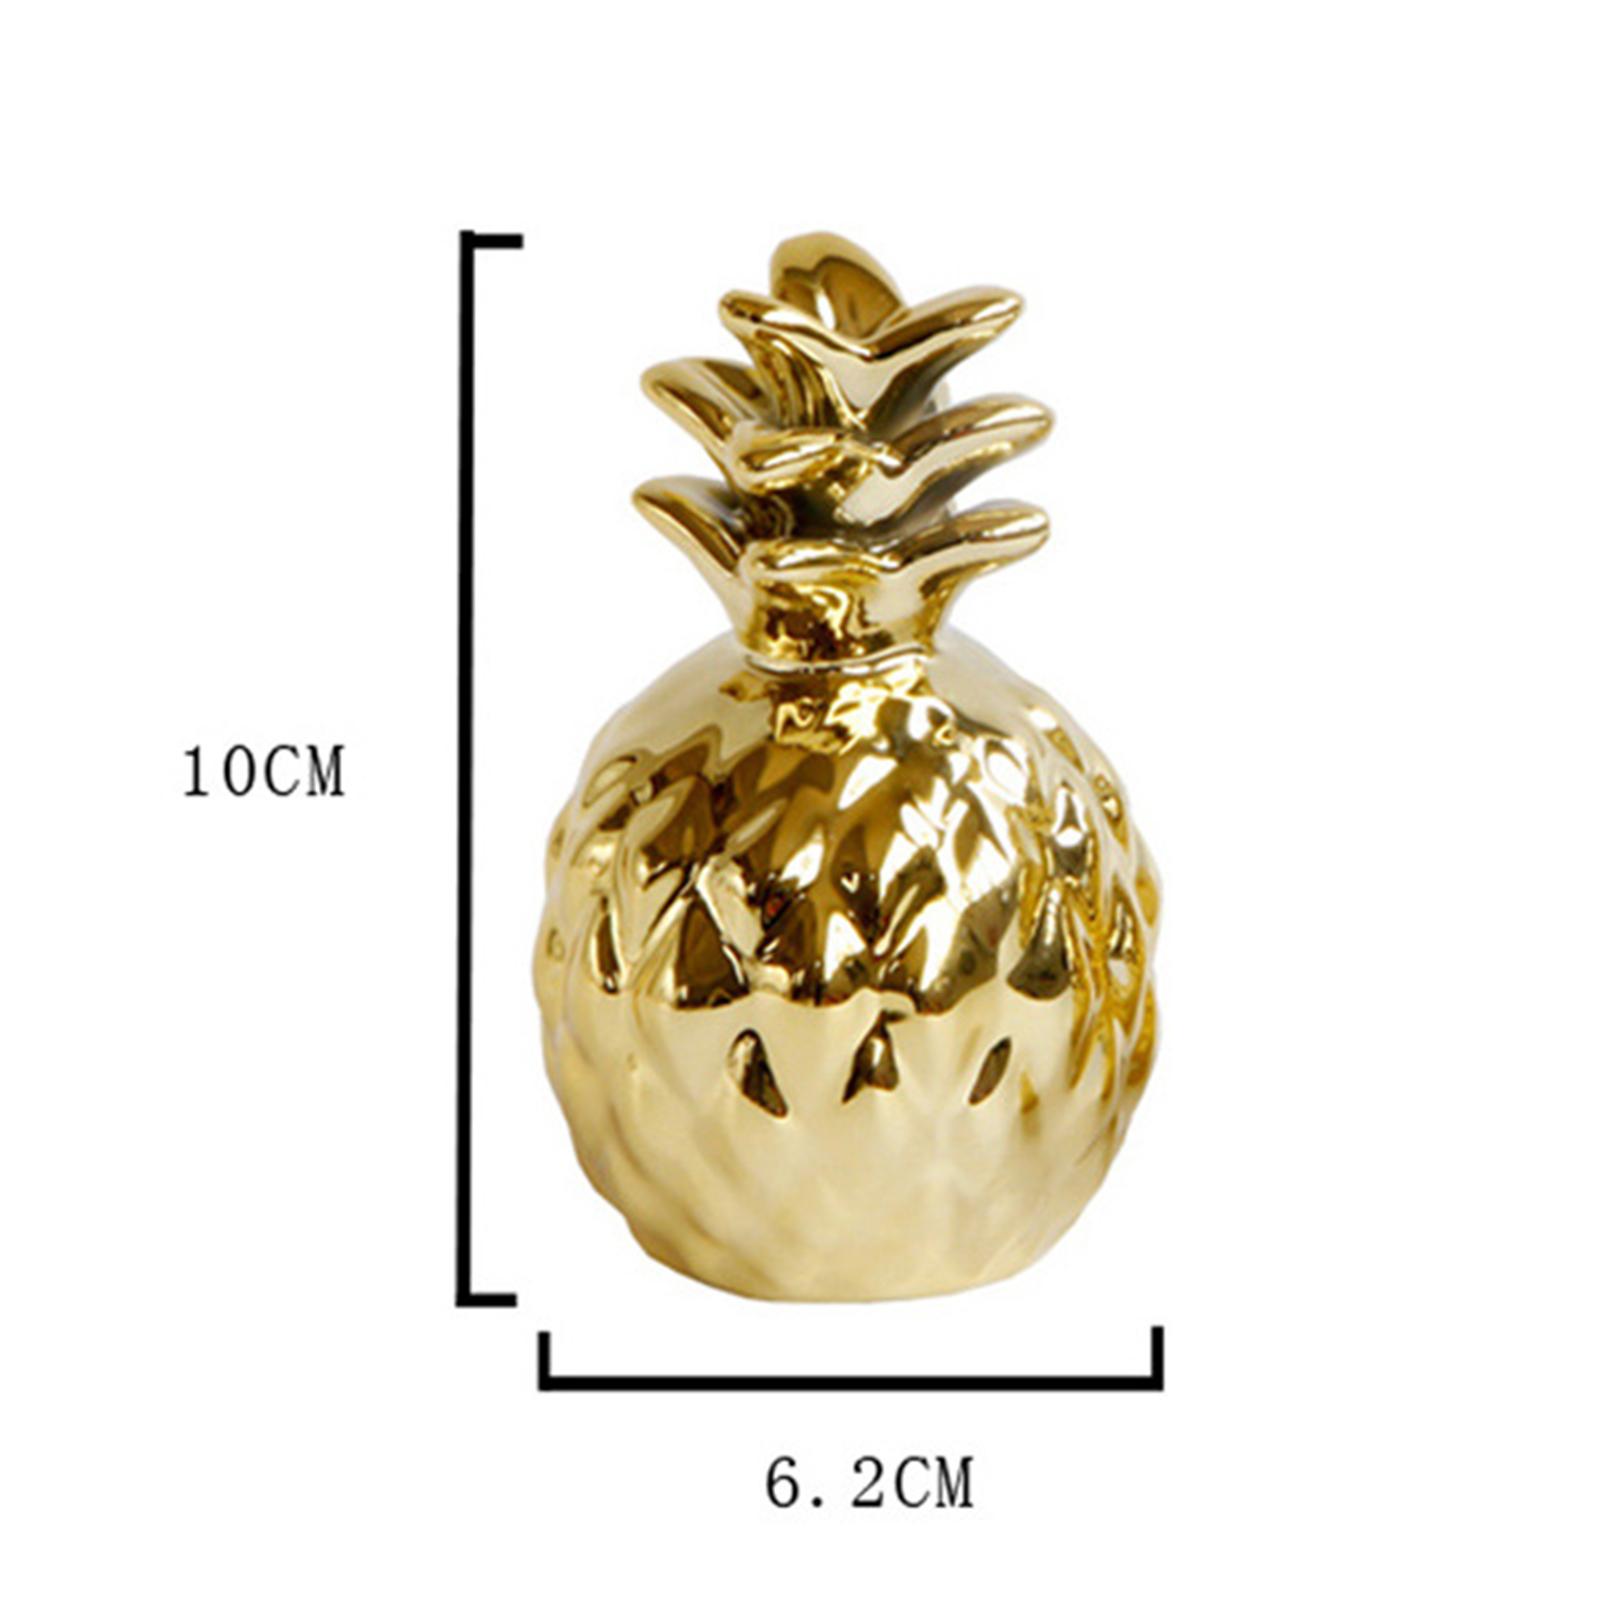 Gold Pineapple Fruits Ornament Collectibles Office Home Decoration